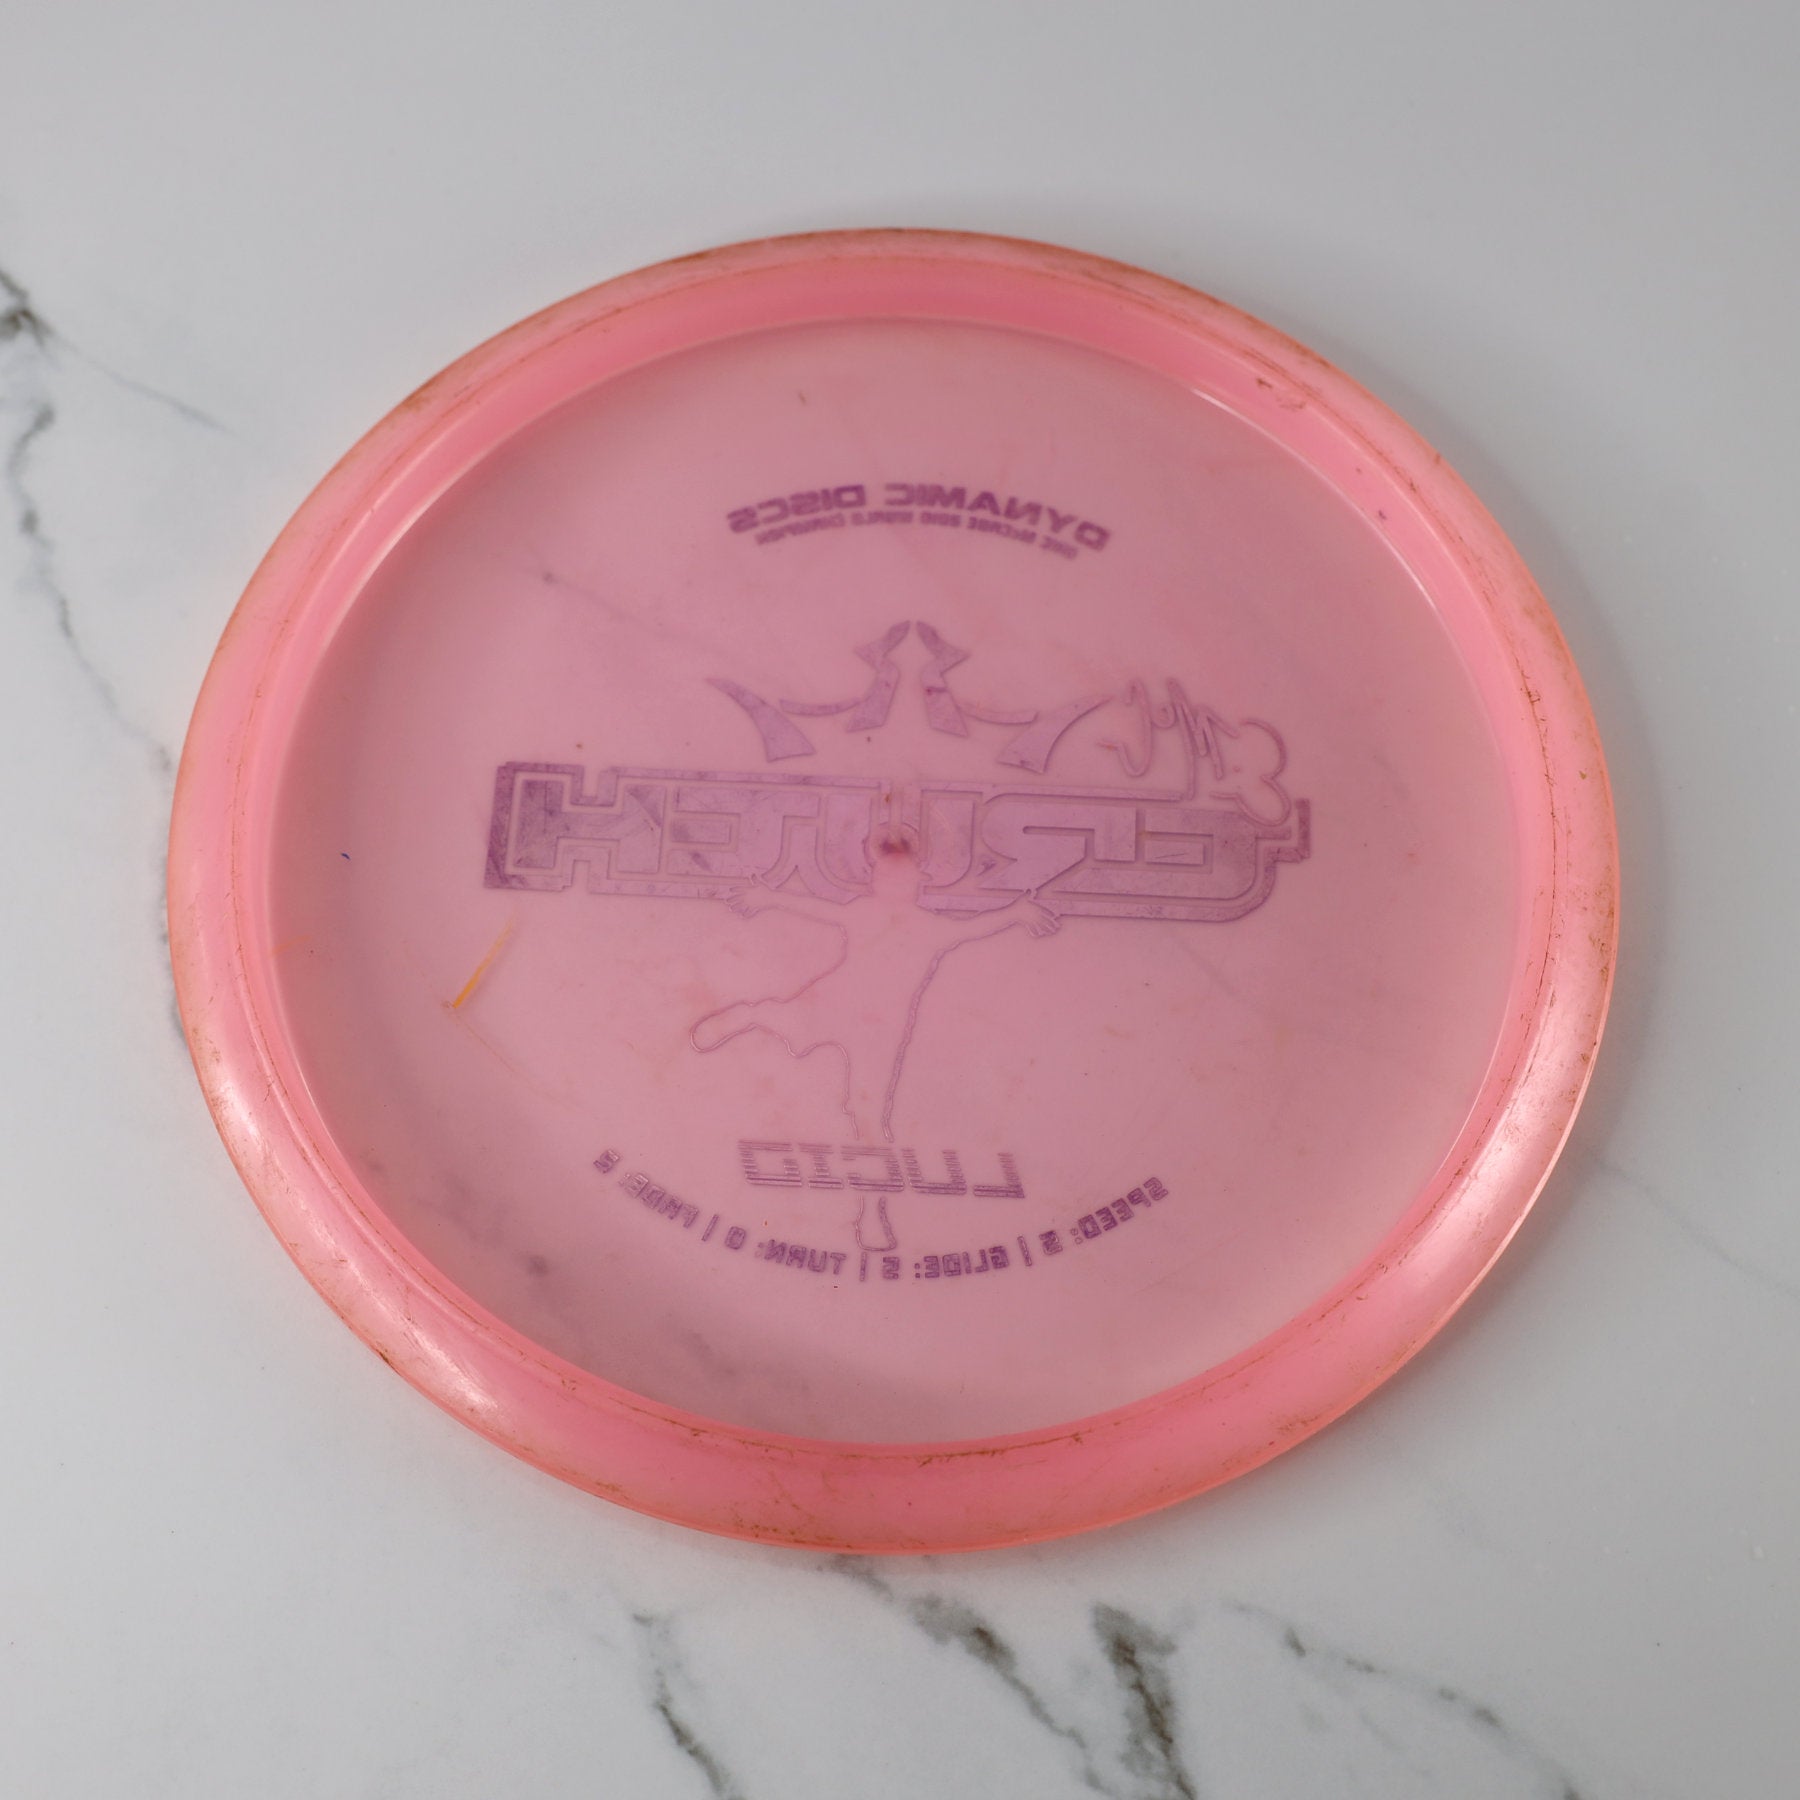 Used Dynamic Discs Lucid Truth